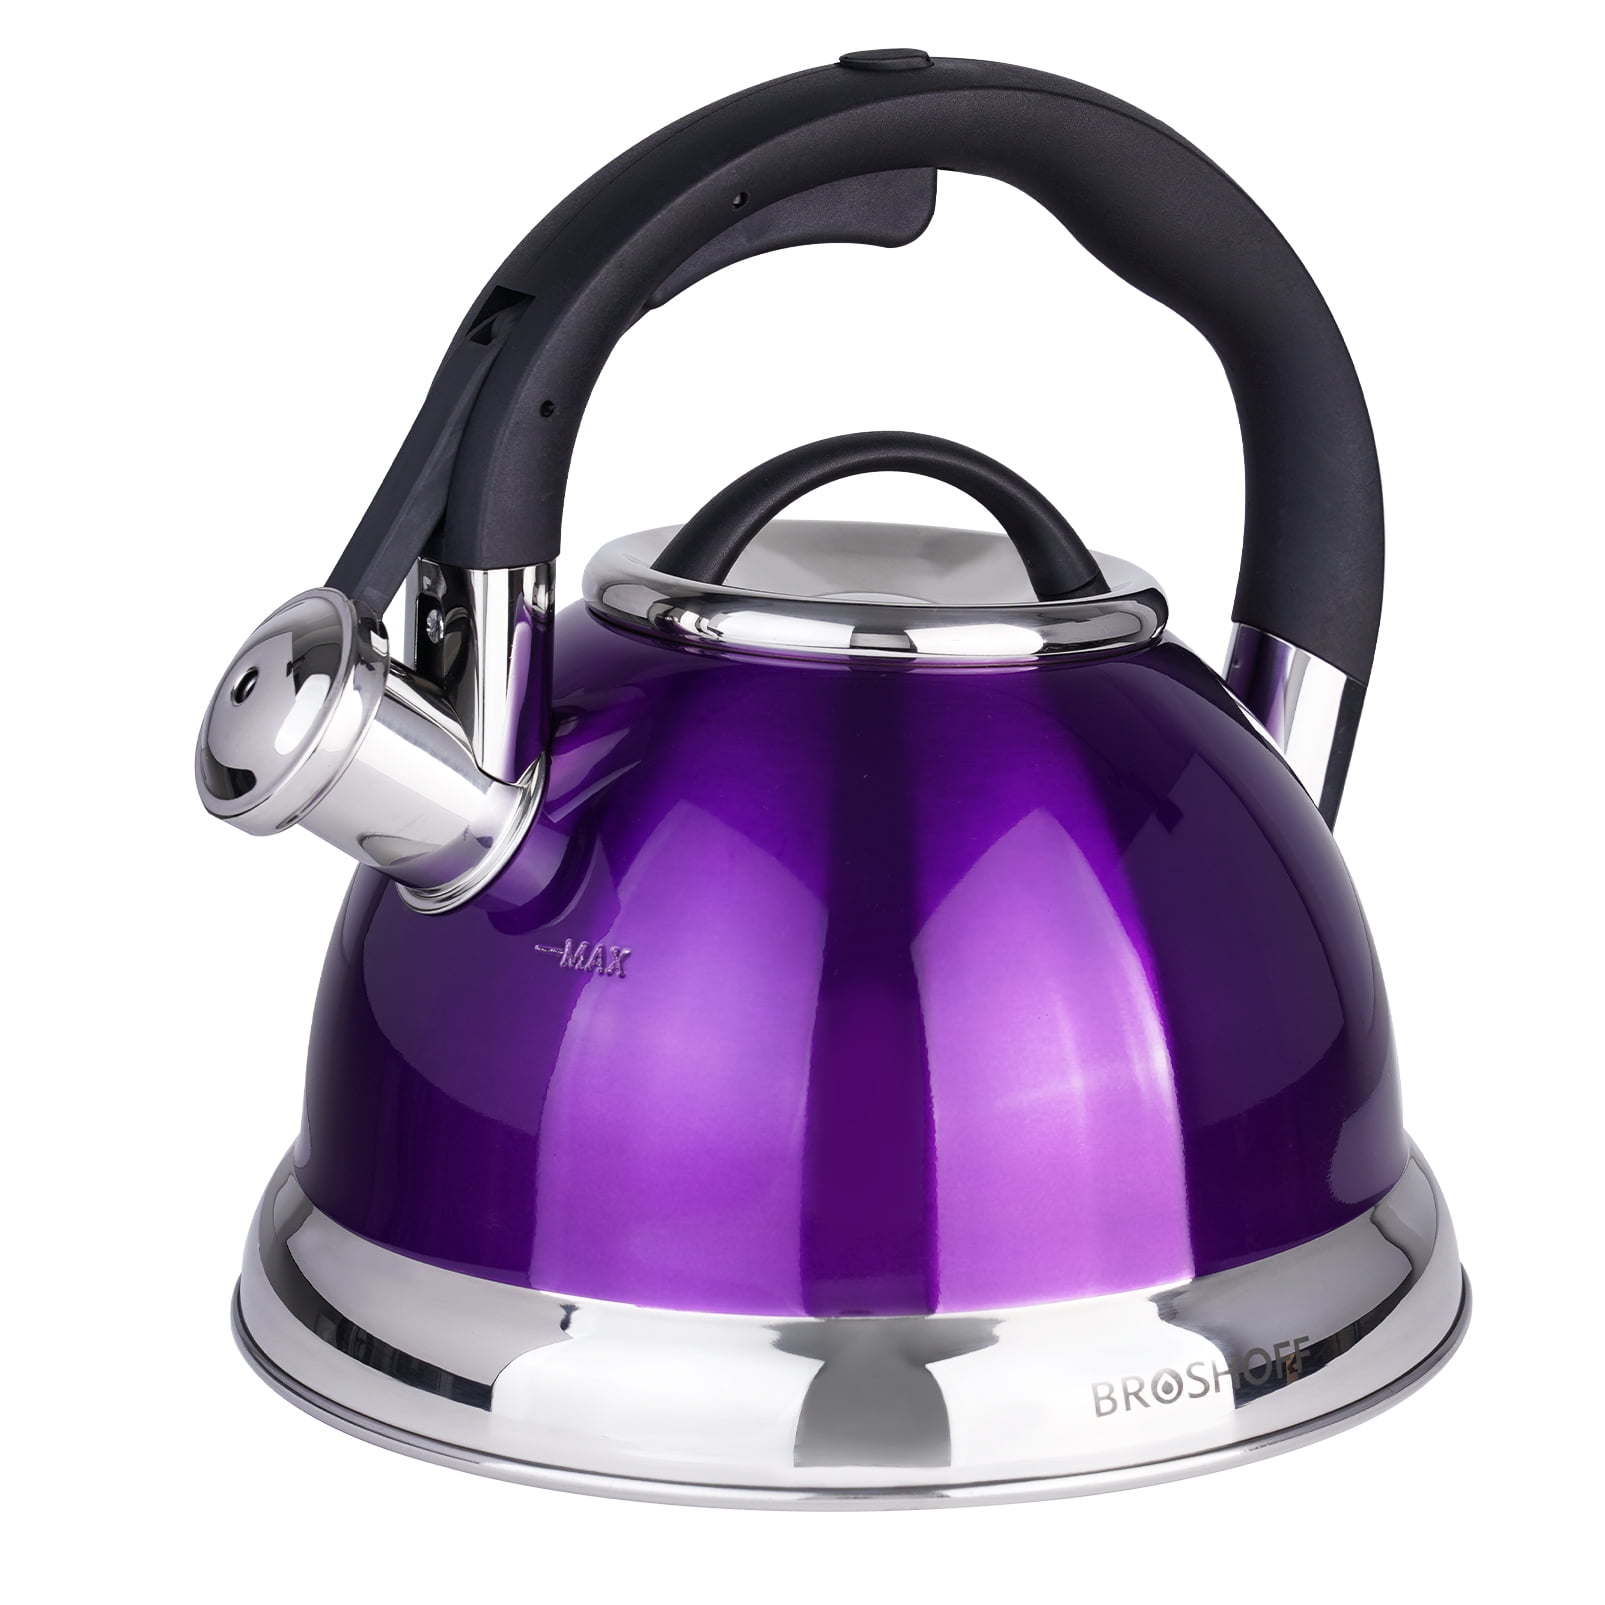 Enamel Stainless Steel Whistling Kettle 2,5L Hob Stove Gas Induction Lavender 